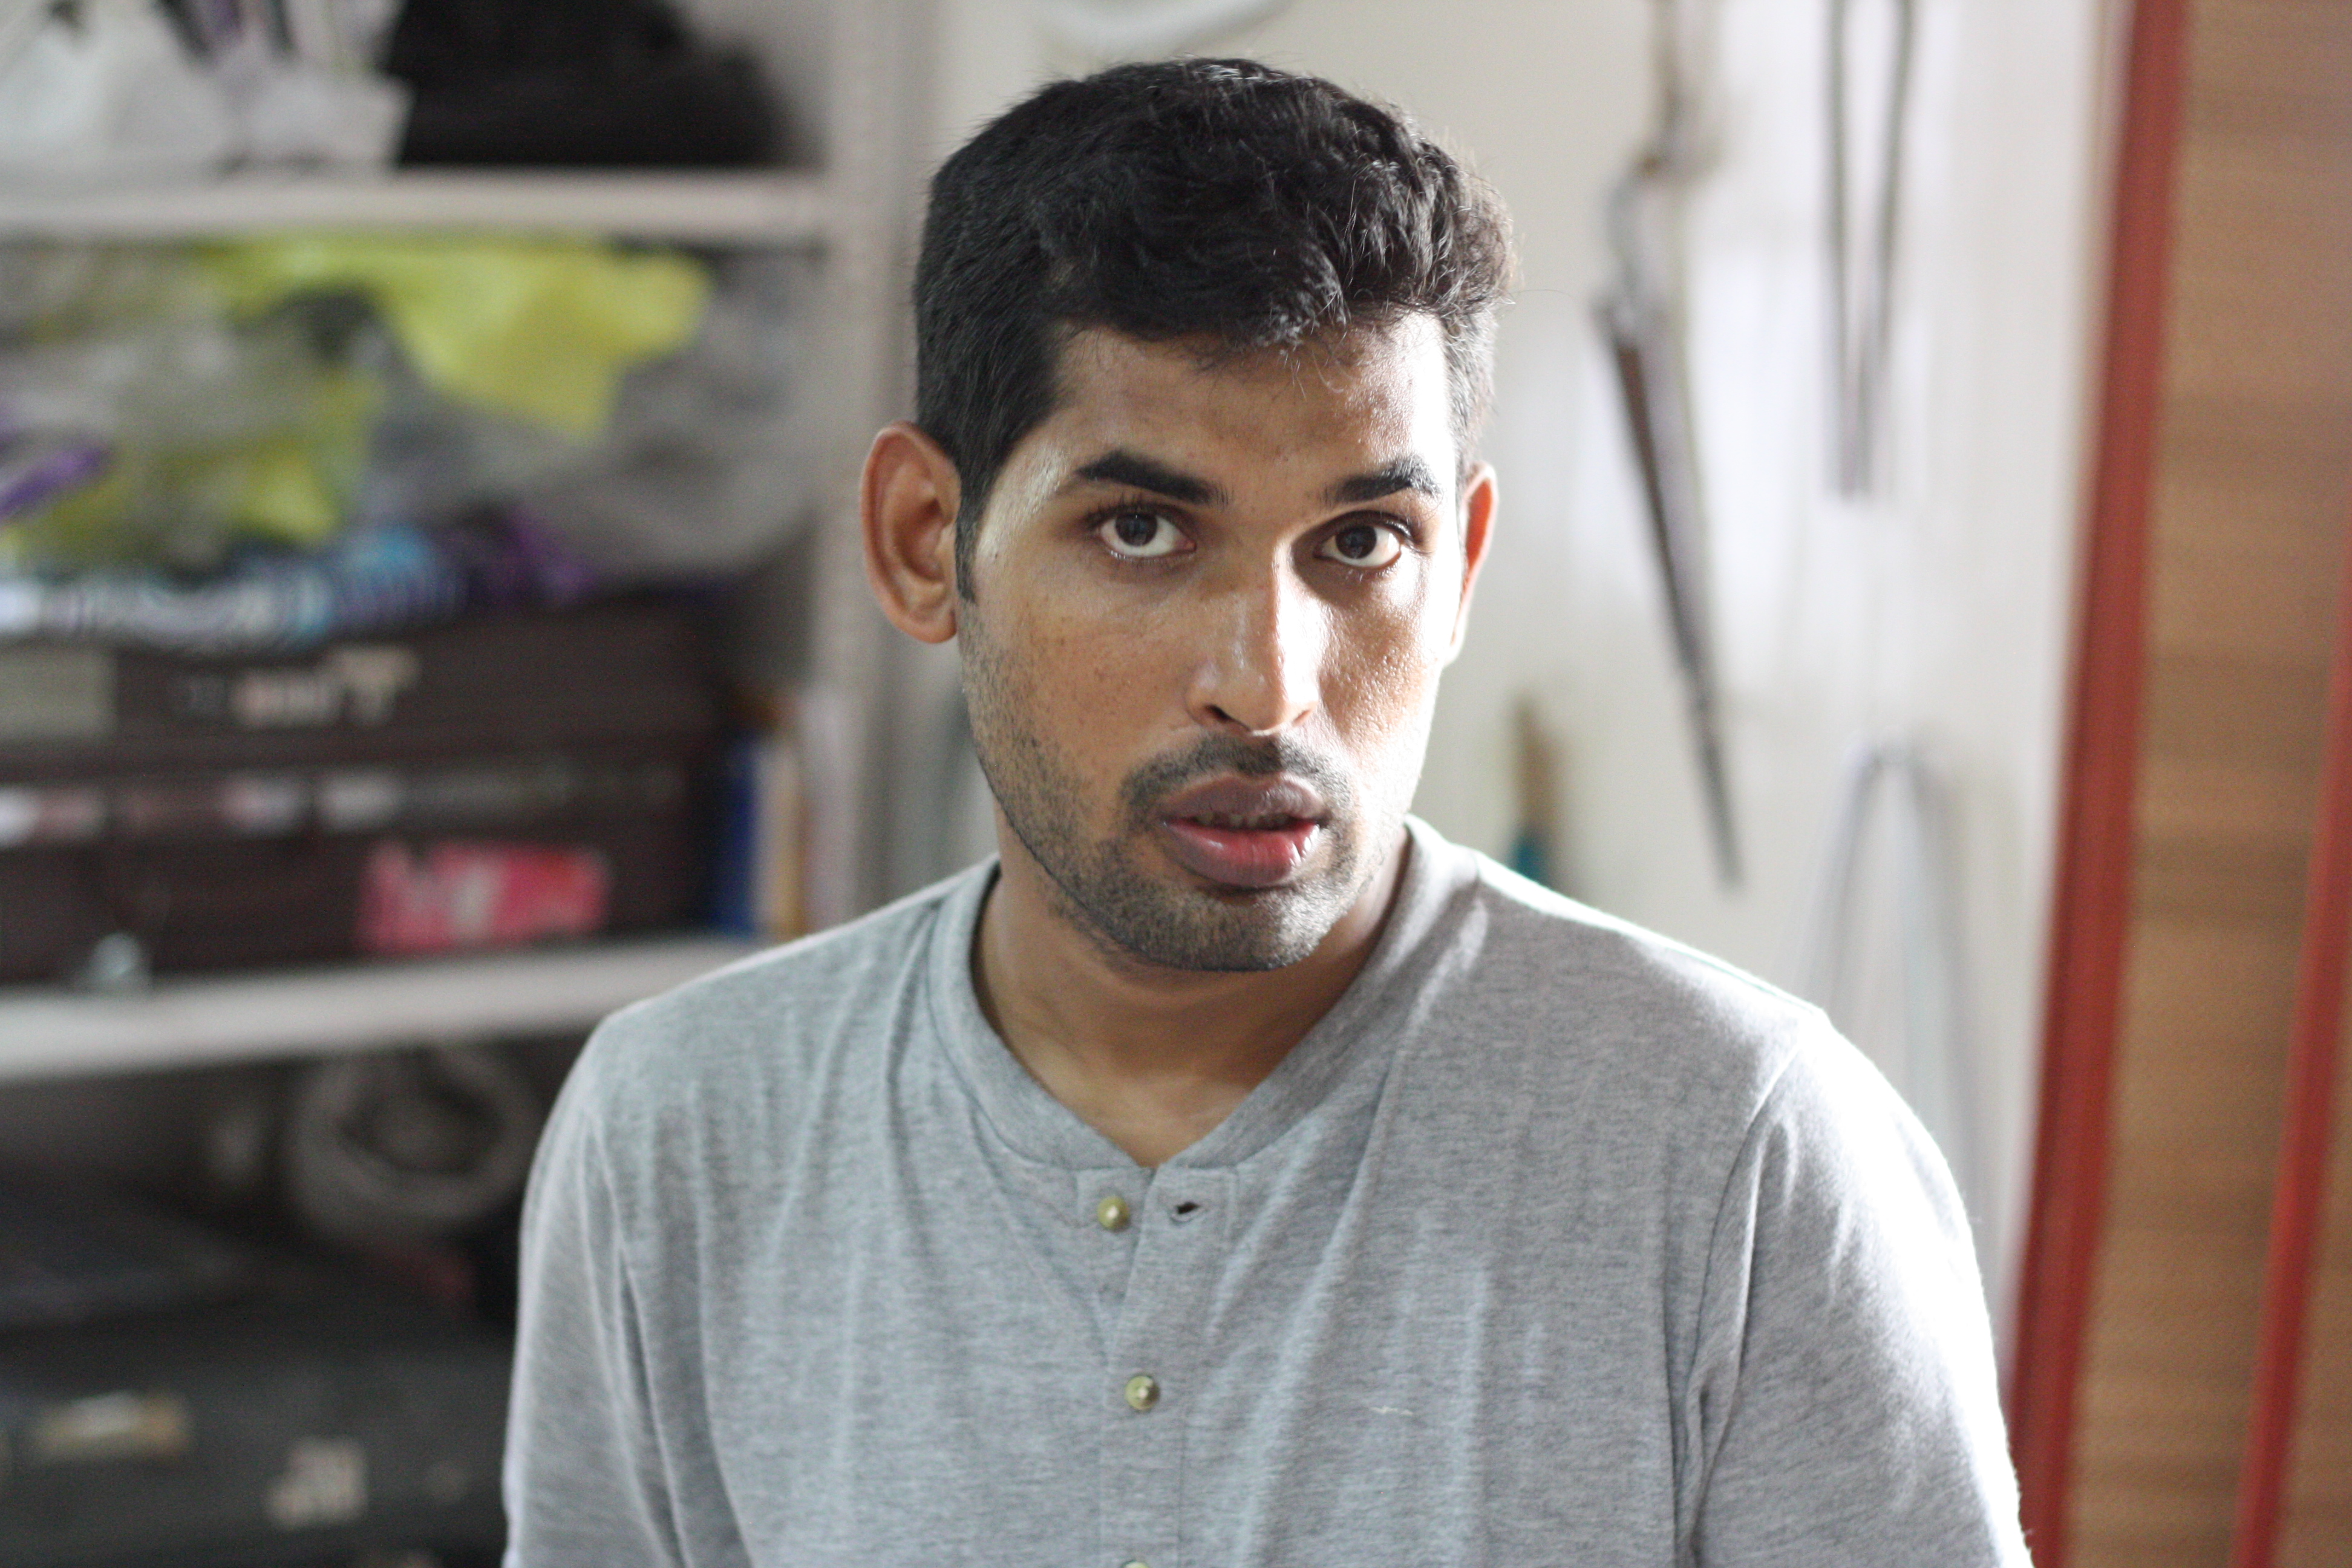 Mohammad Shameem is the puppet and prop designer and also performs in the show.